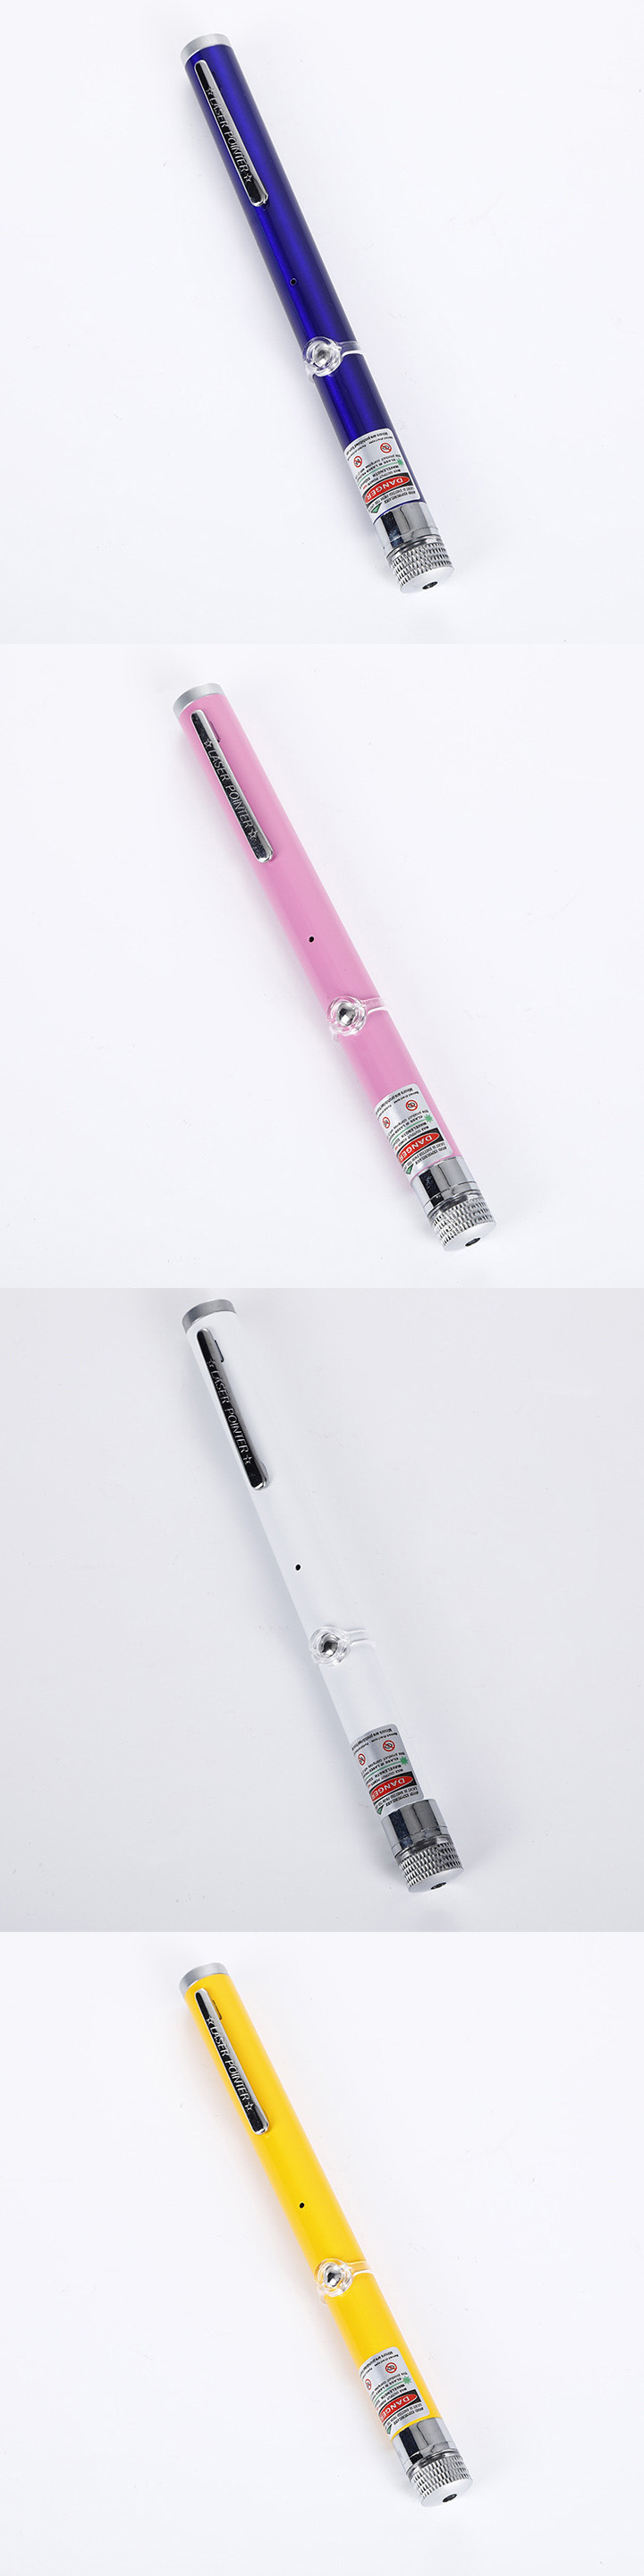 stylo laser USB rechargeable